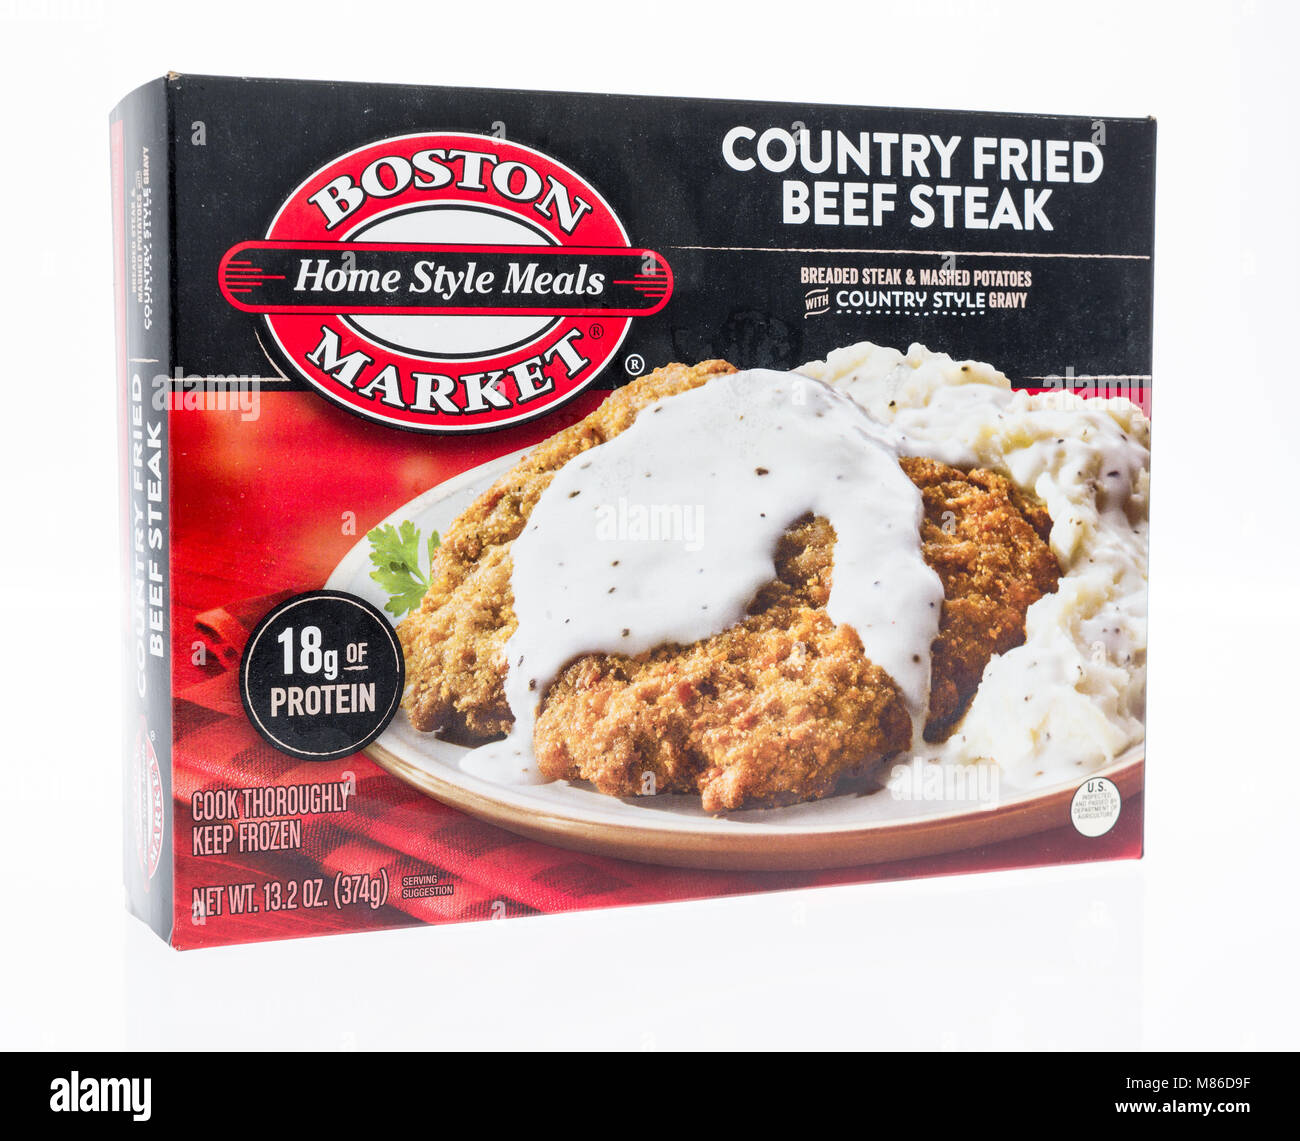 Winneconne, WI - 27 February 2018:   A box of Boston Market home style meals in country fried beef steak on an isolated background. Stock Photo